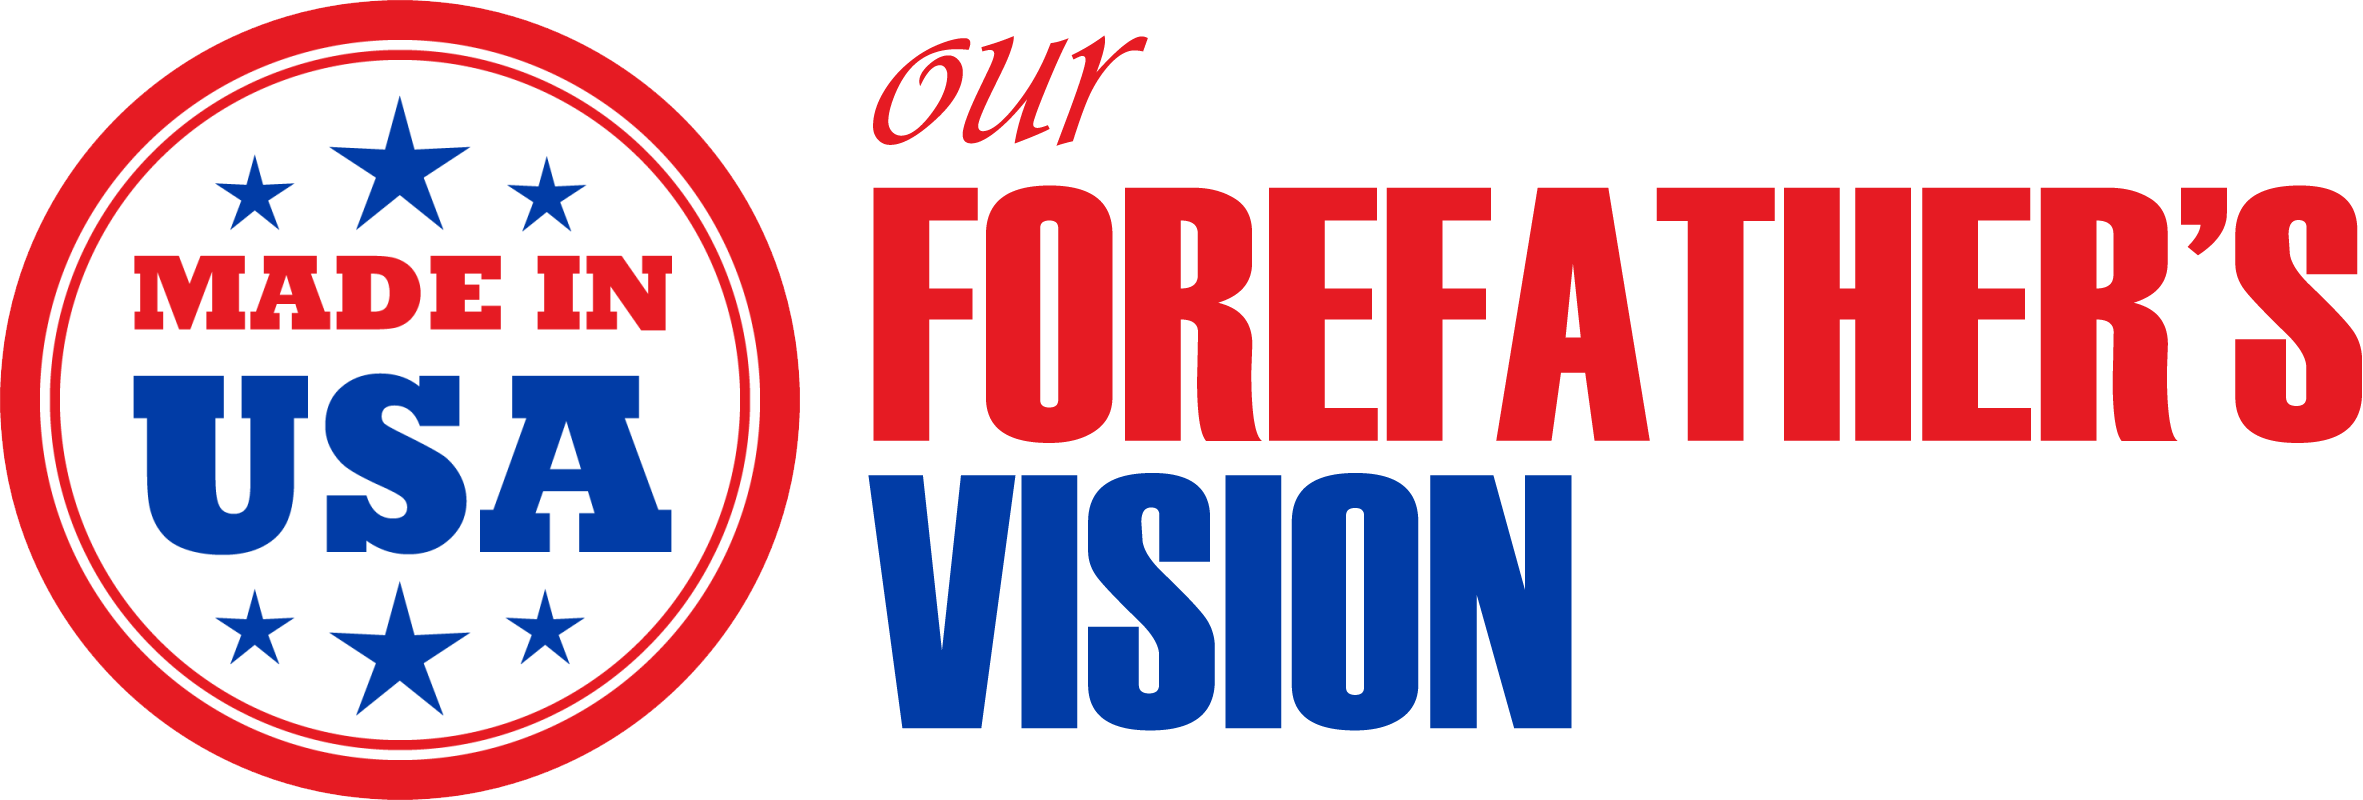 Our Fore Father's Vision